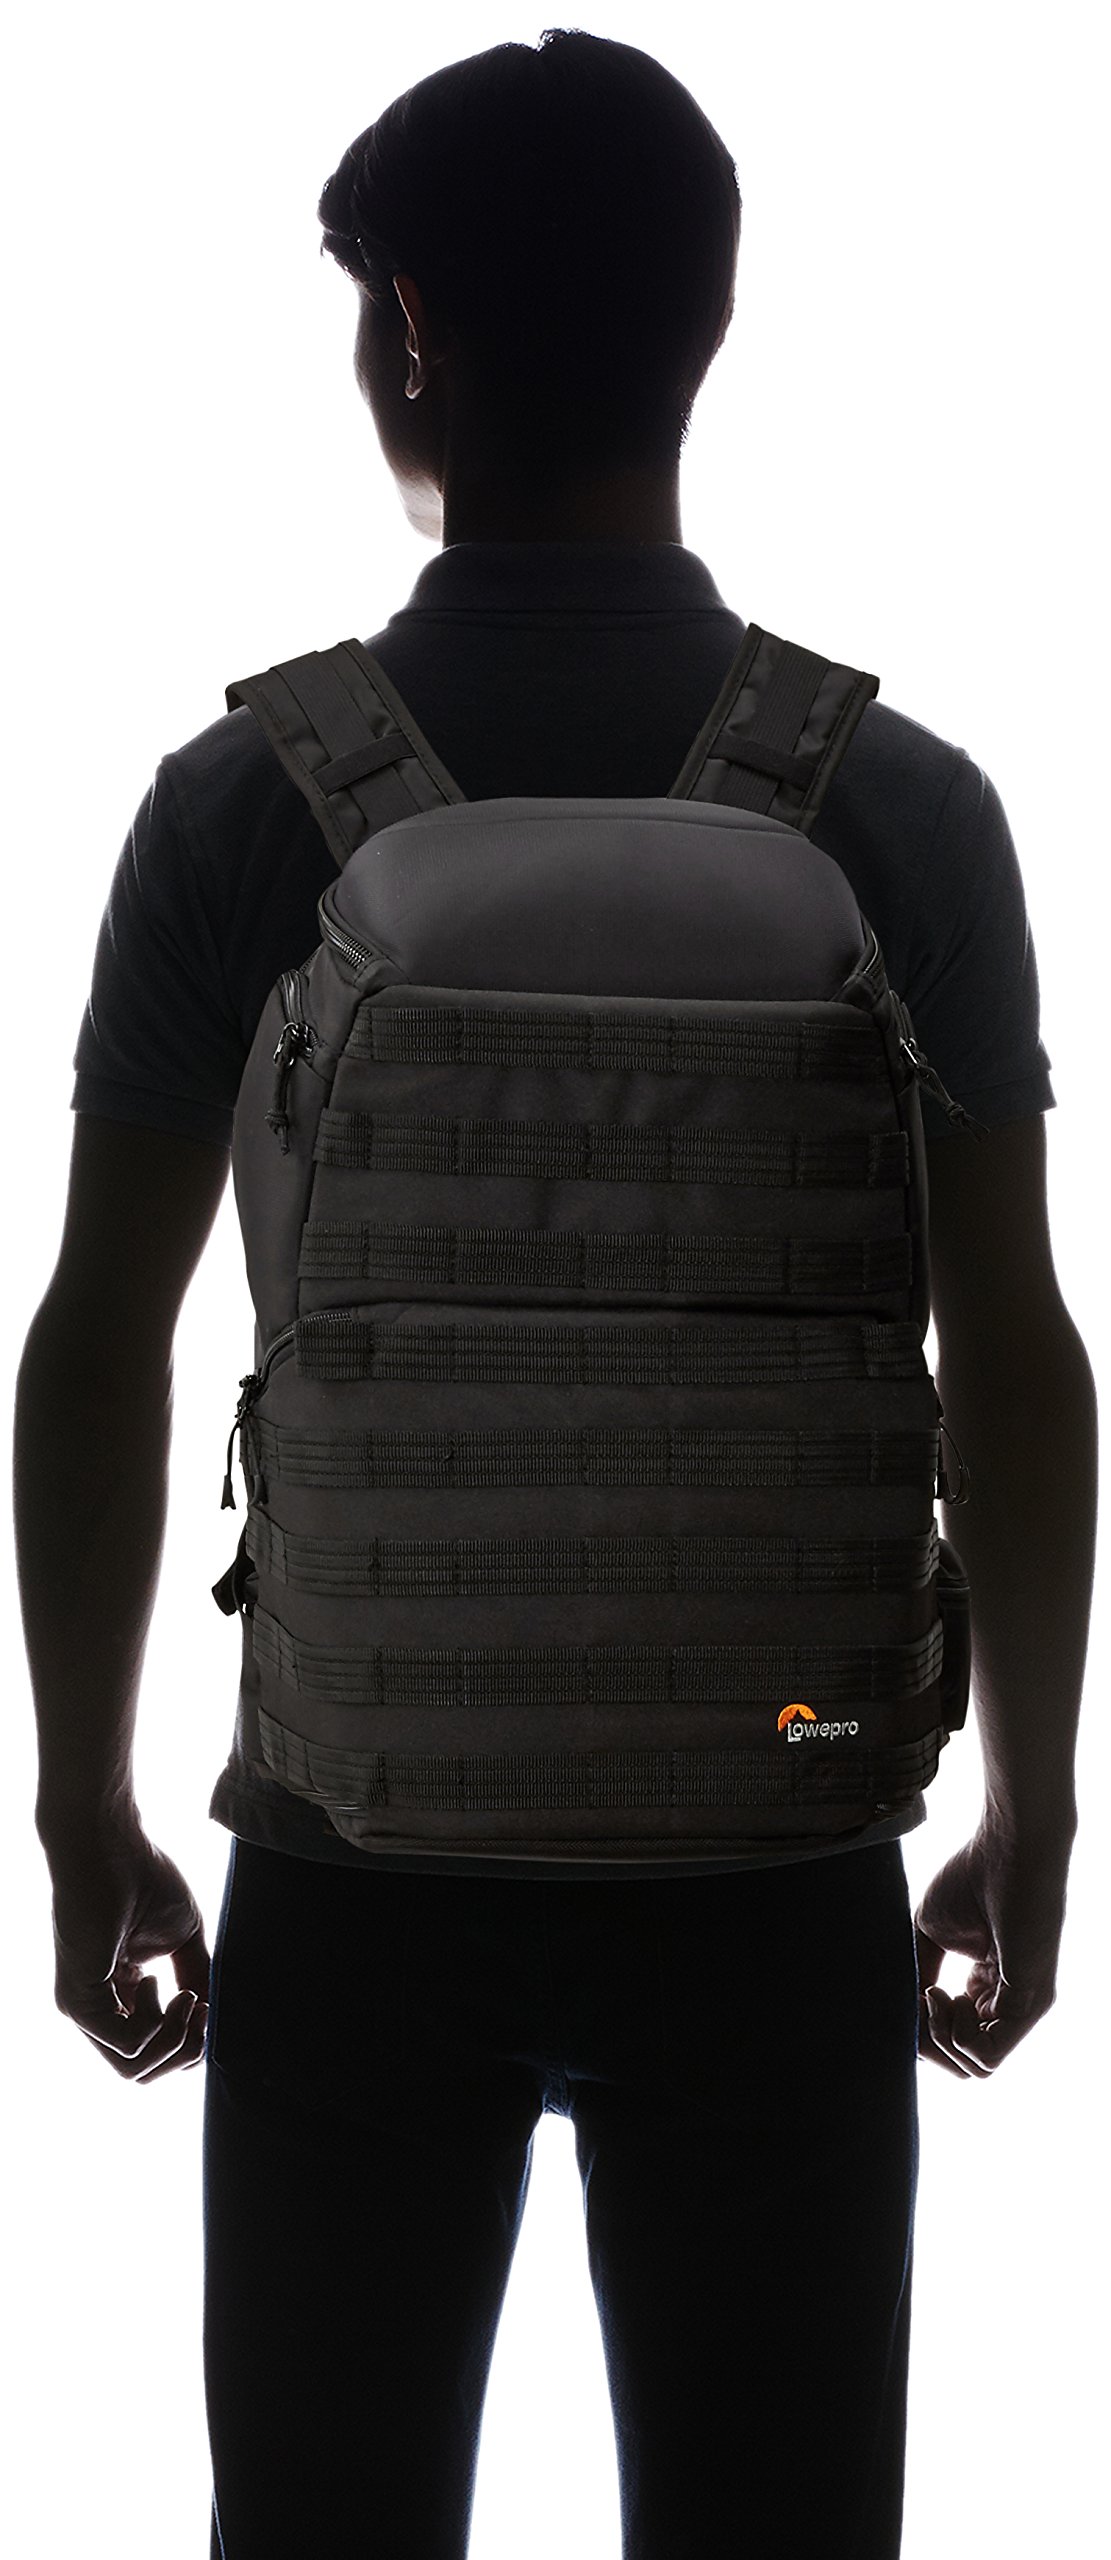 Lowepro ProTactic 450 AW Camera Backpack - Professional Protection for Your Camera Gear or DJI Mavic Pro/Mavic Pro Platinum